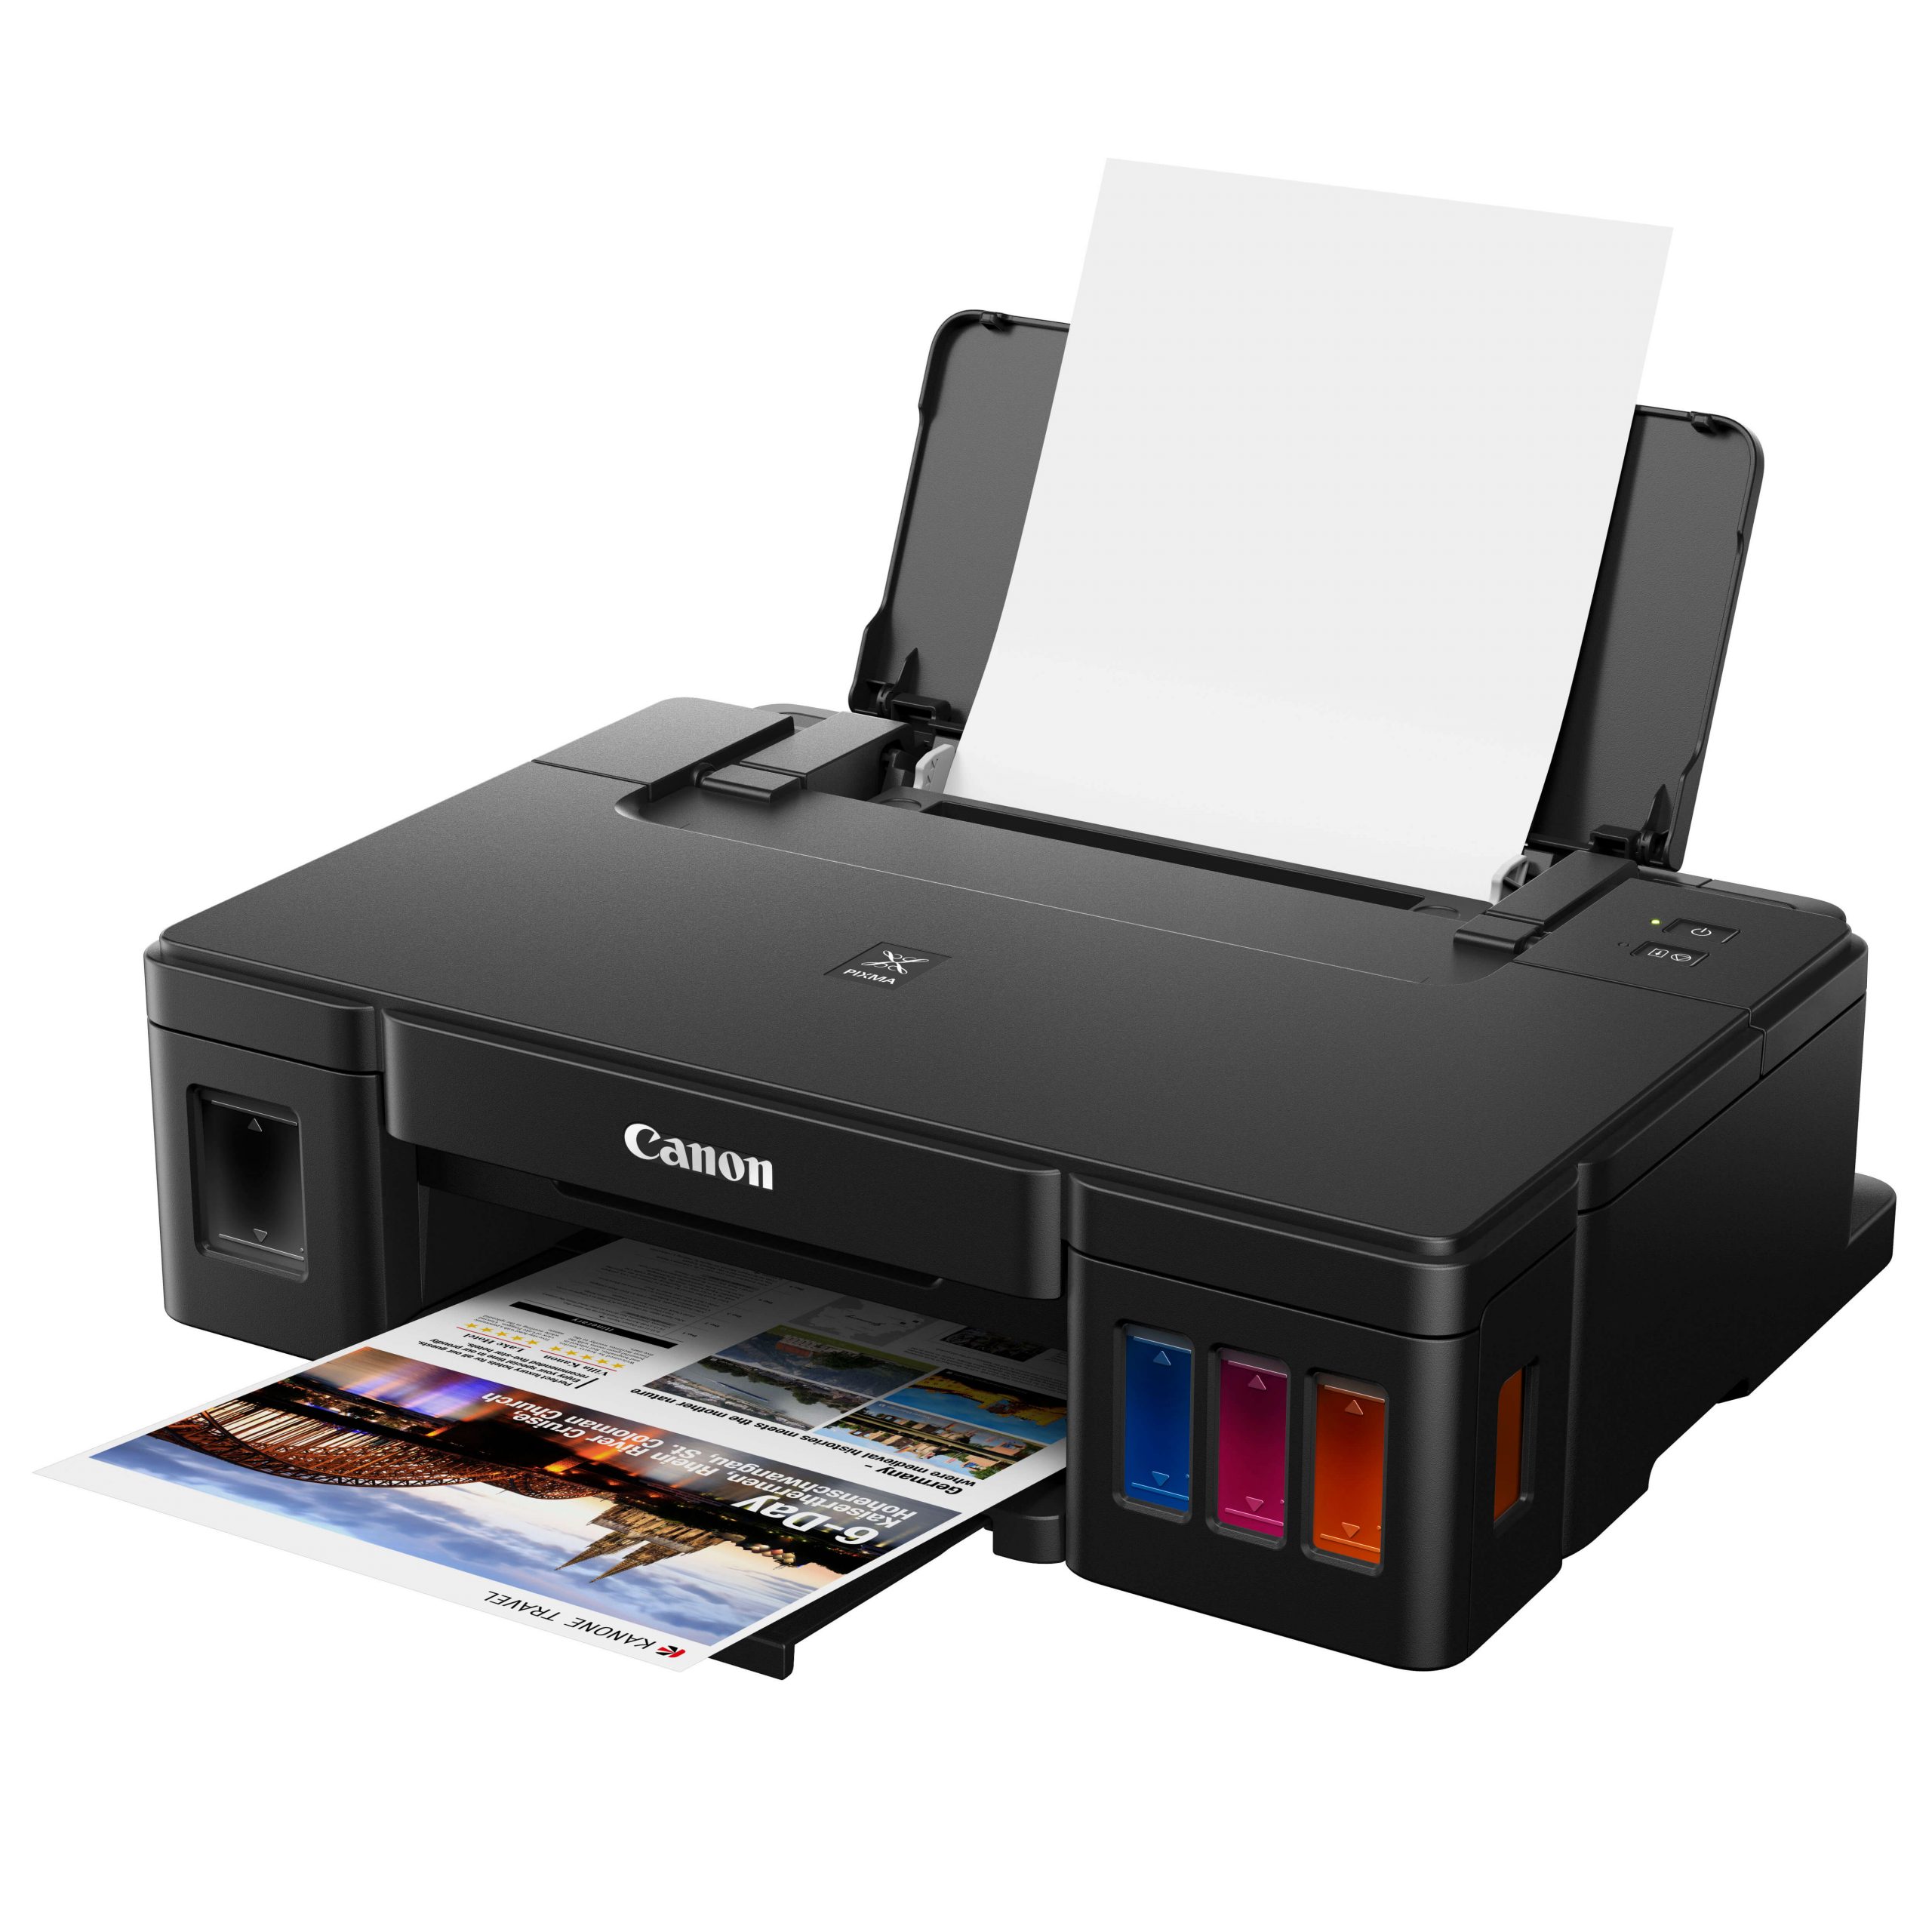 Canon’s New G Series PIXMA Printers Turns Ideas Into Opportunities